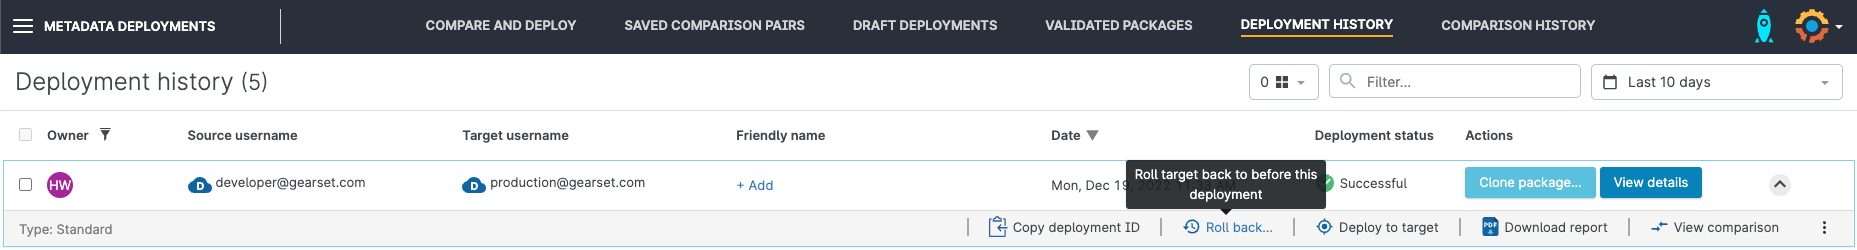 Screenshot of Gearset’s deployment history page